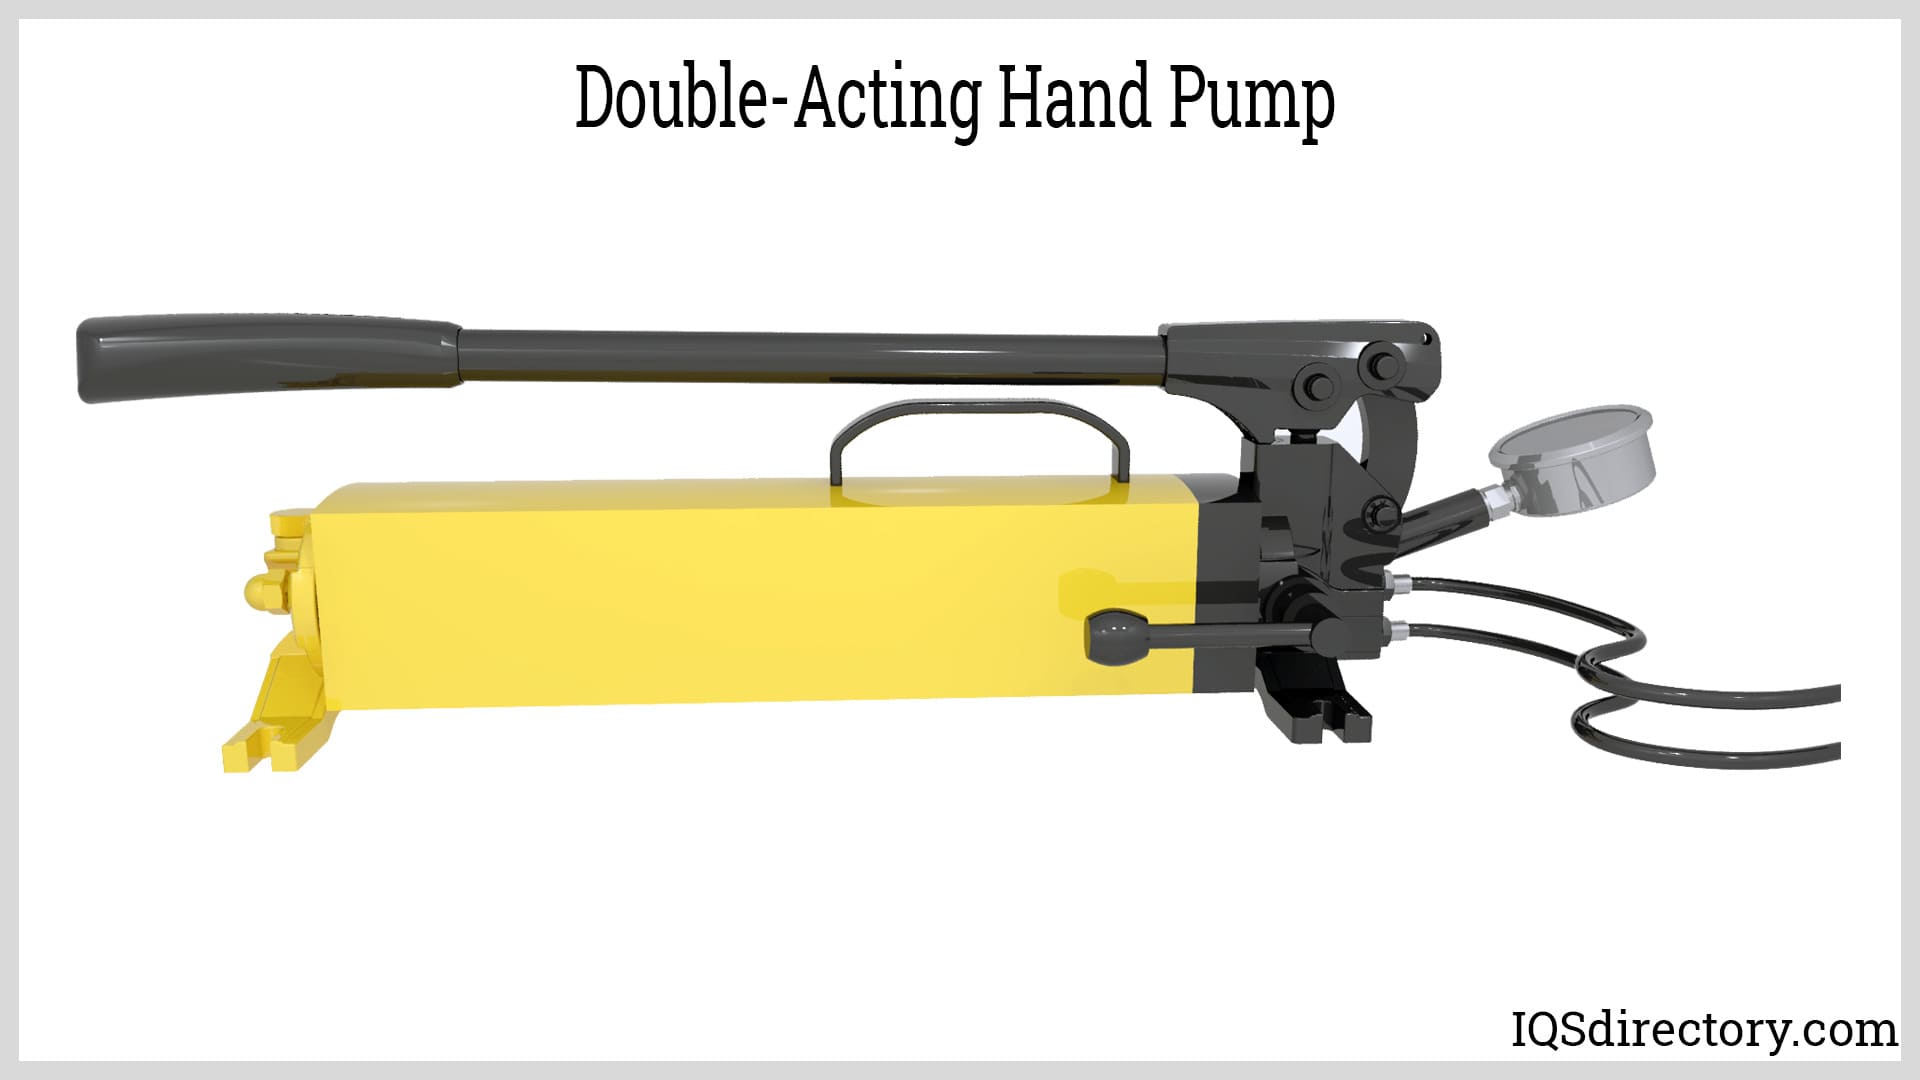 Double-acting Hand Pump